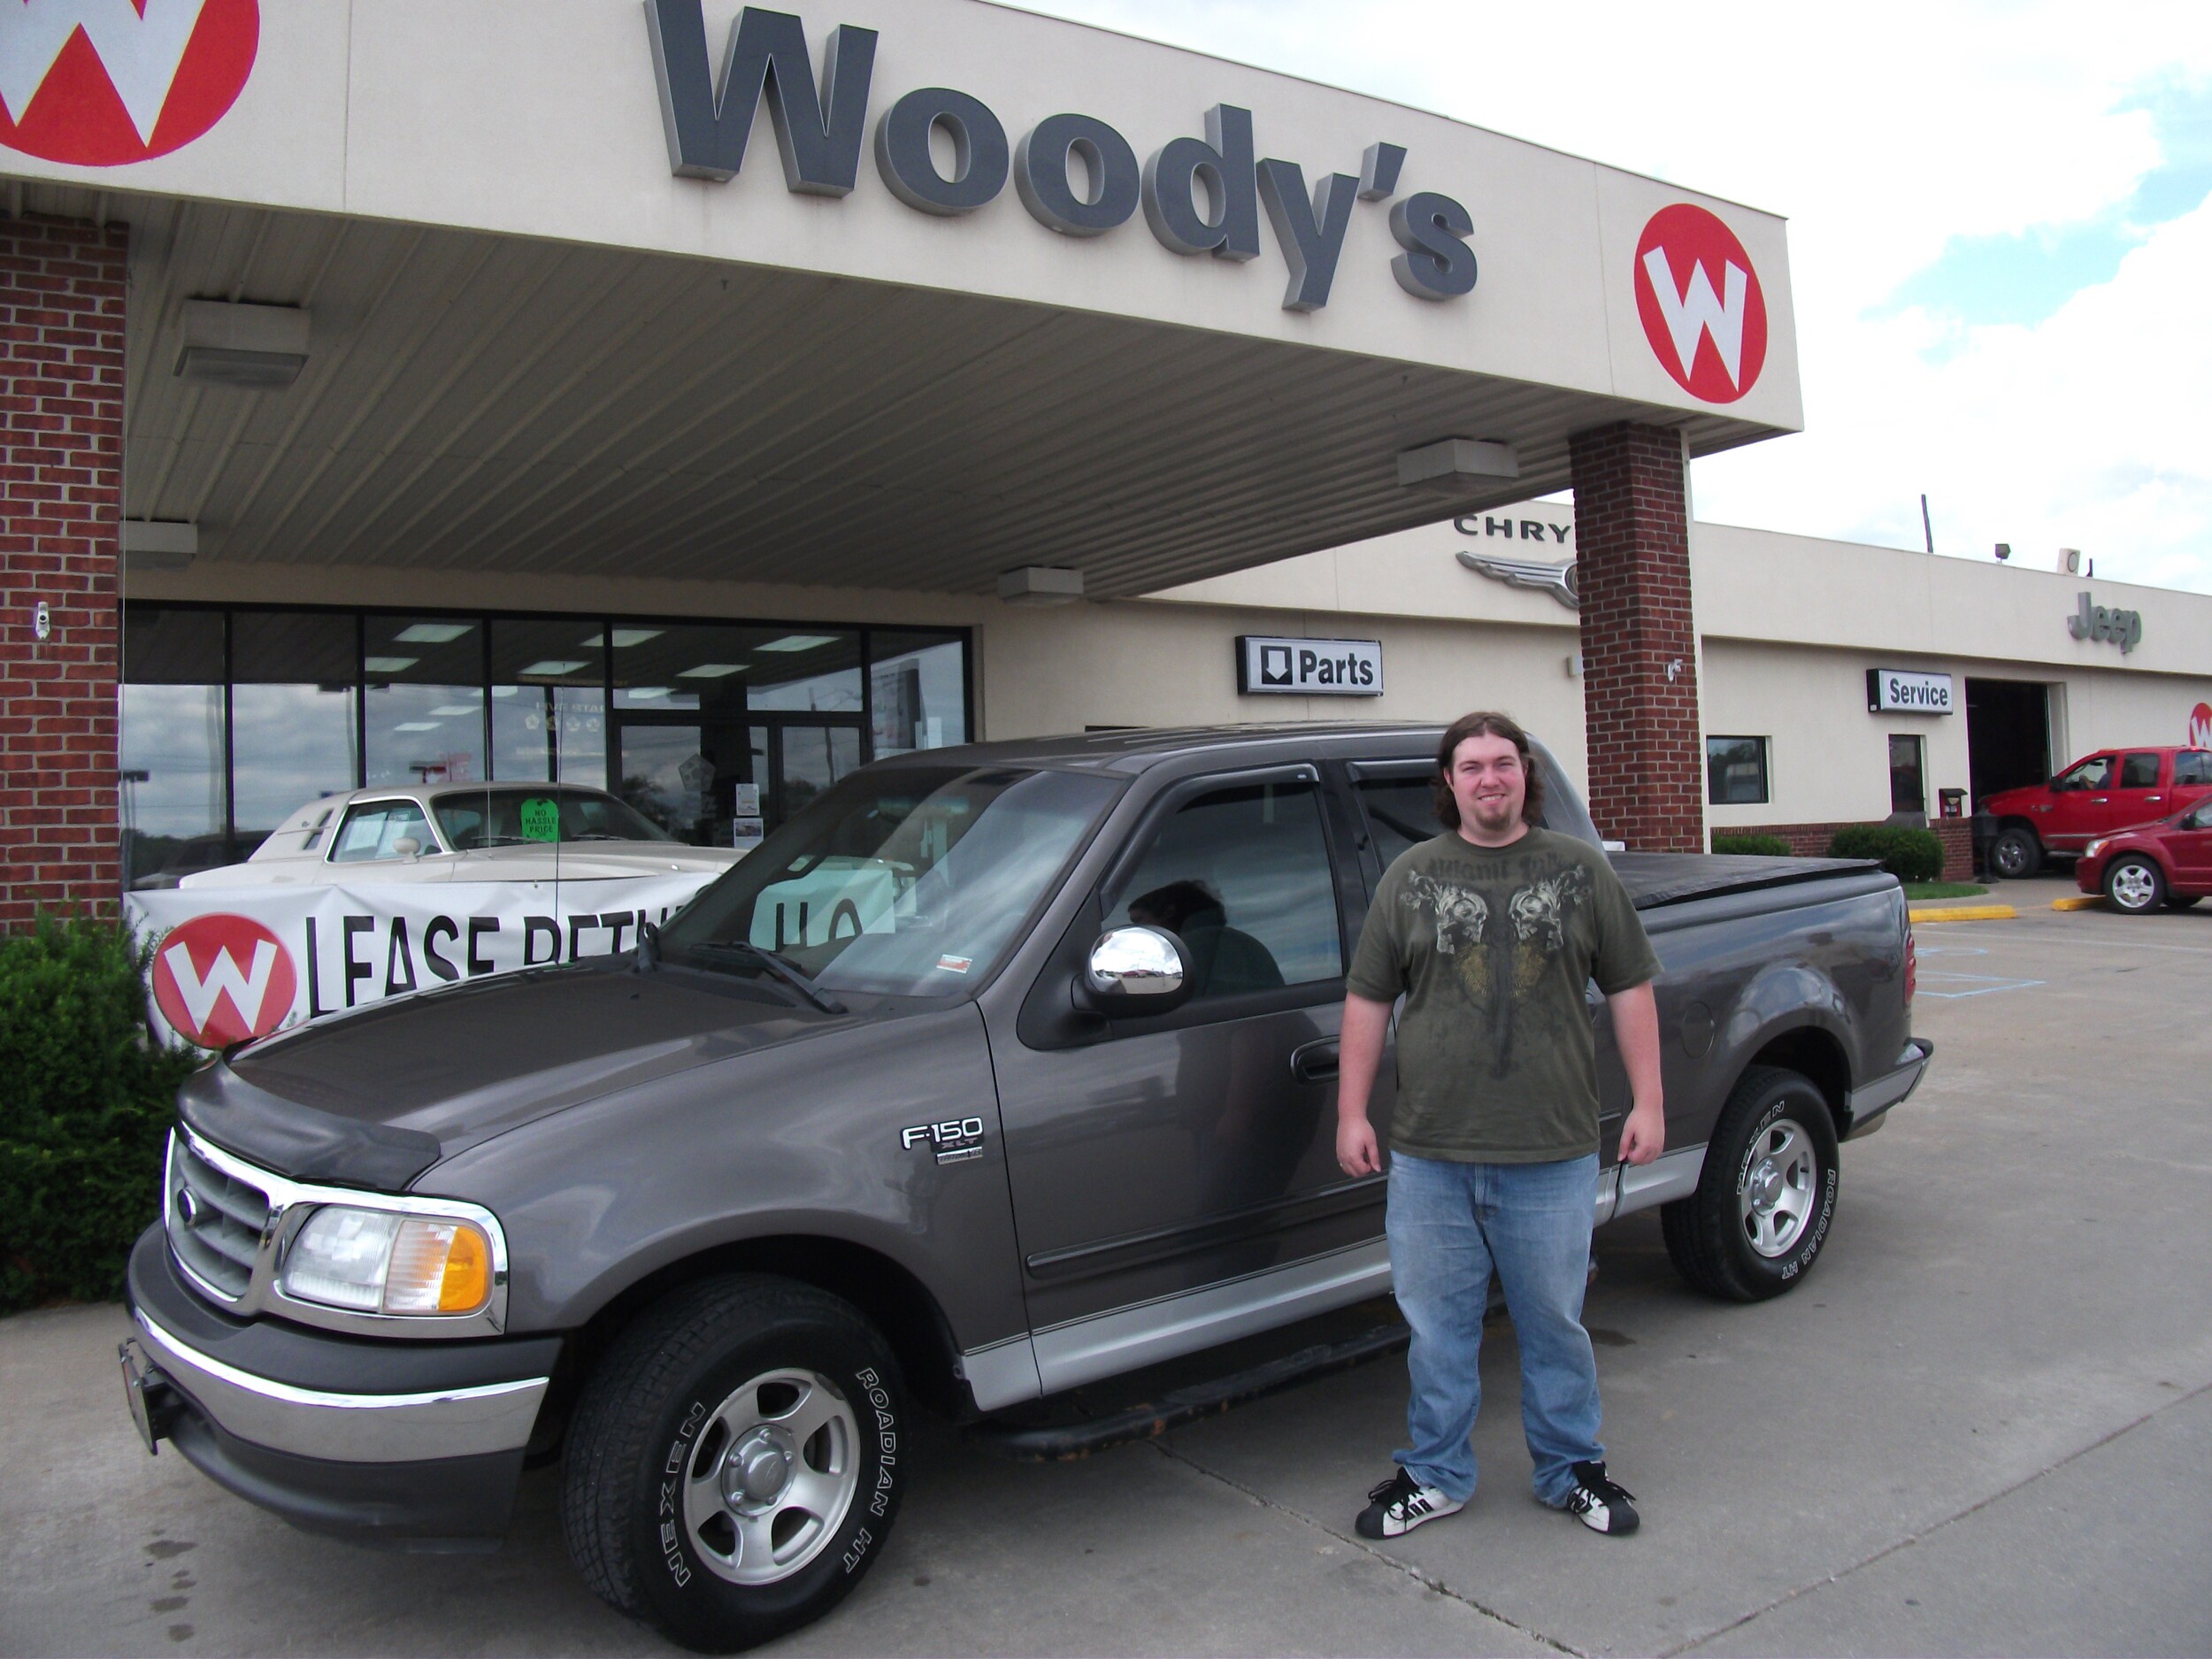 Woody dodge jeep chrysler chillicothe #1